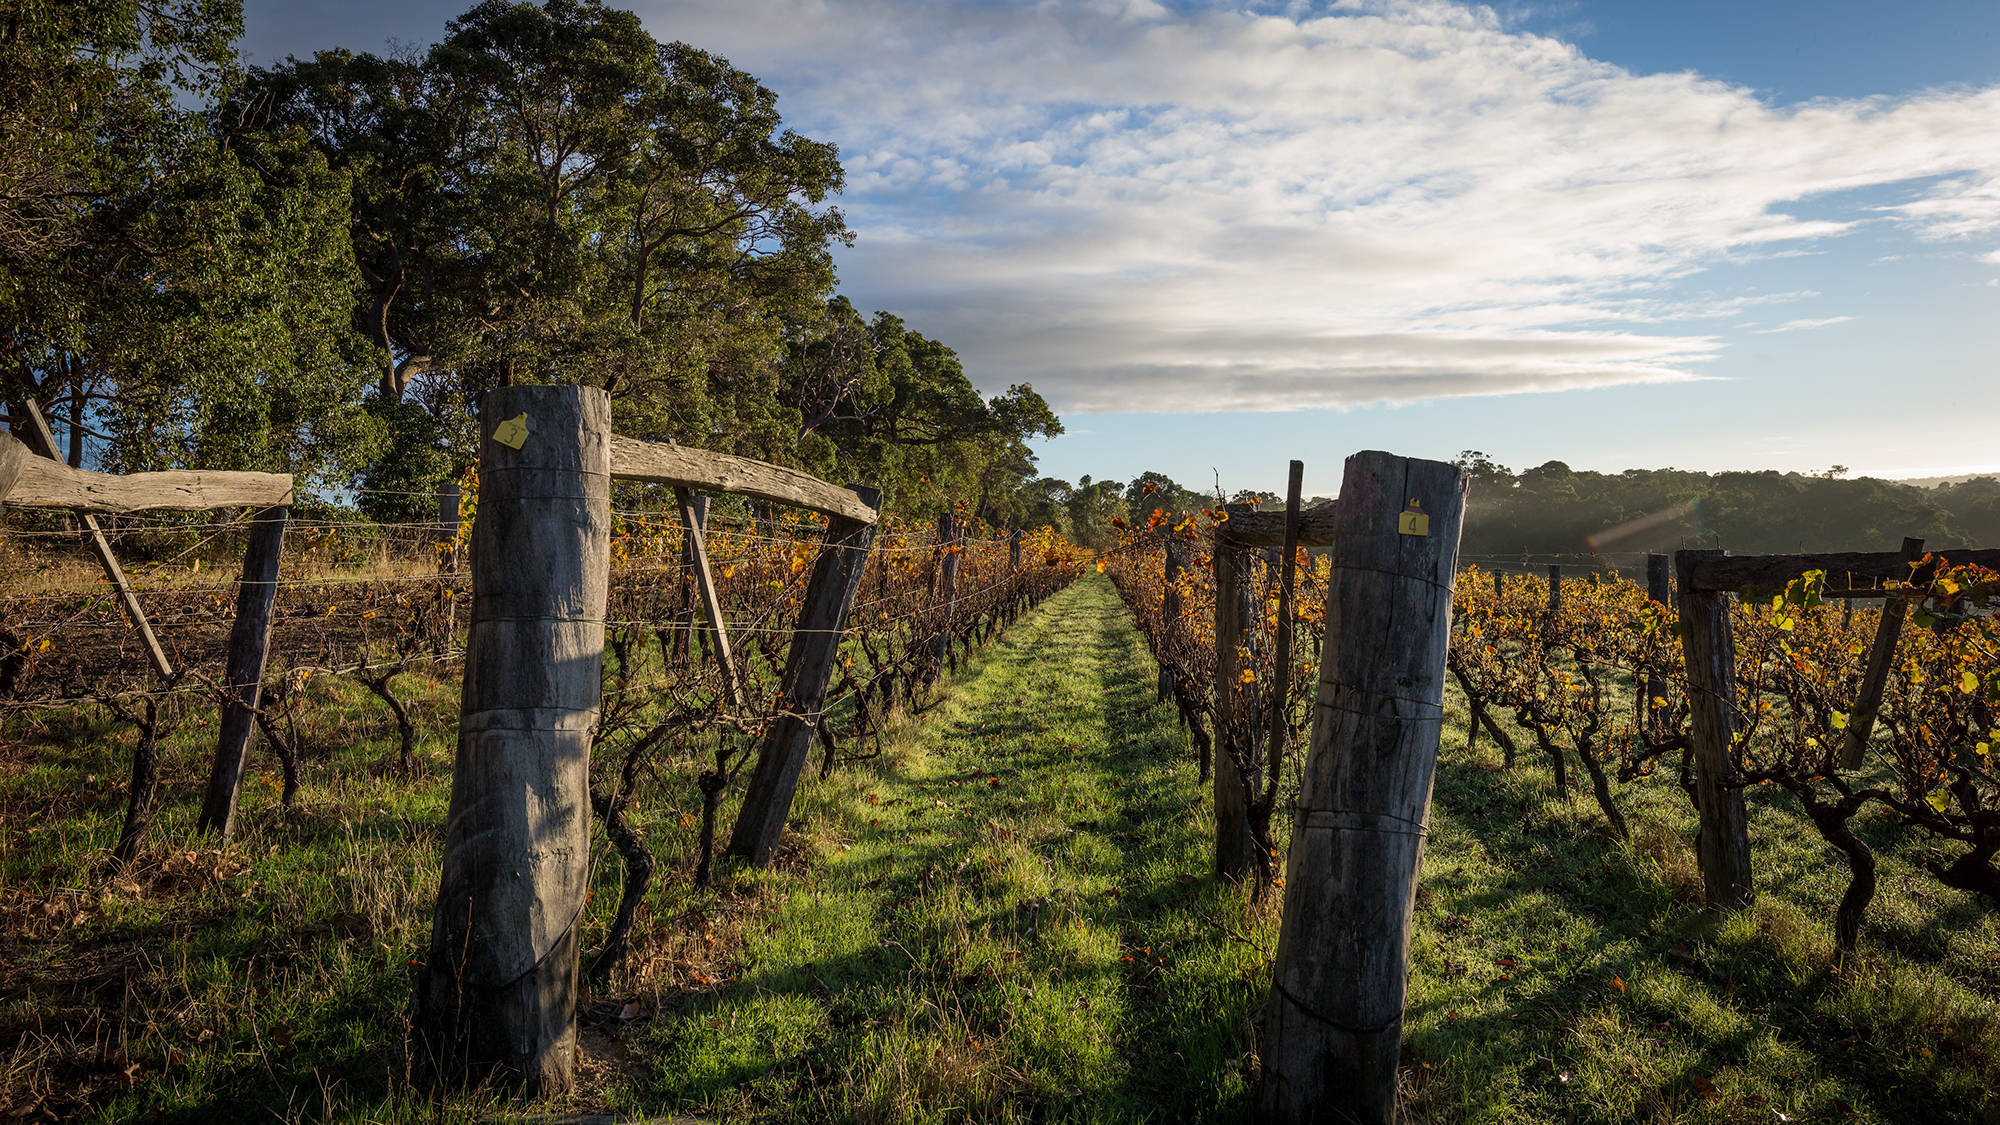 More than just wine: Explore the Margaret River